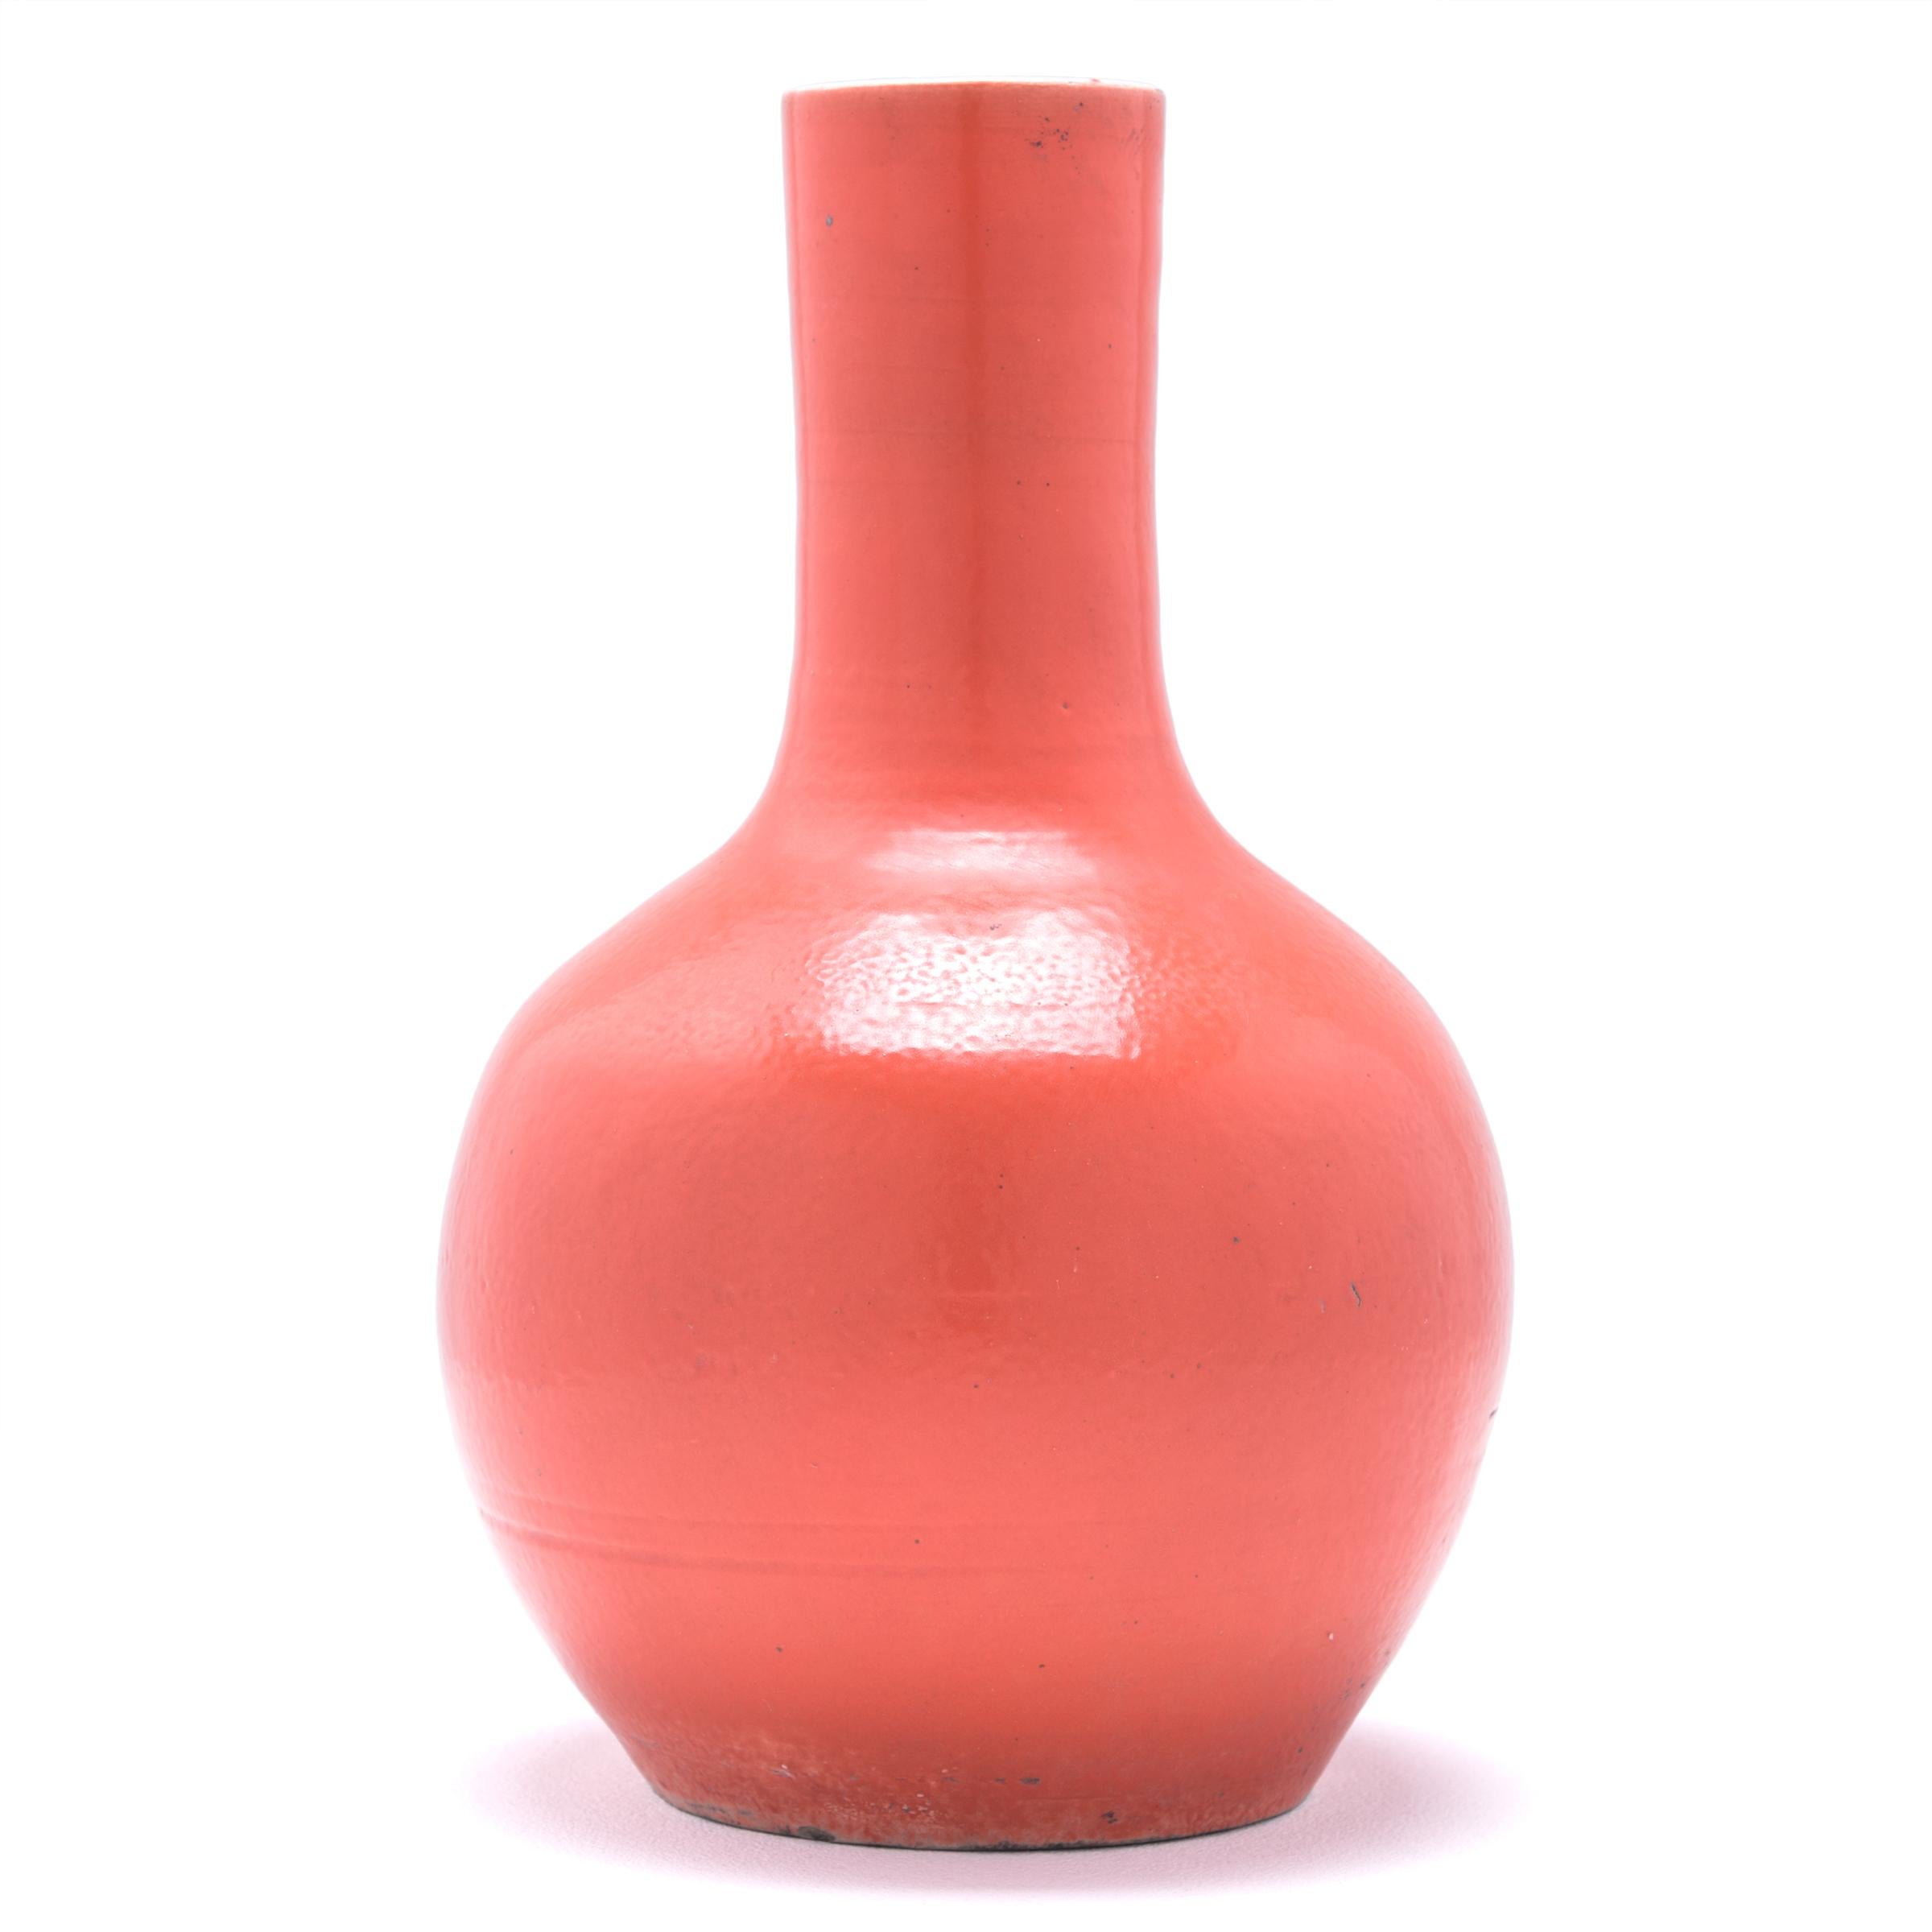 Drawing on a long Chinese tradition of monochrome ceramics, this tall gooseneck vase is glazed in vibrant persimmon-orange glaze. The vase features a rounded, globular body and a narrow cylindrical neck, a classic form known as 'tianqiuping' or